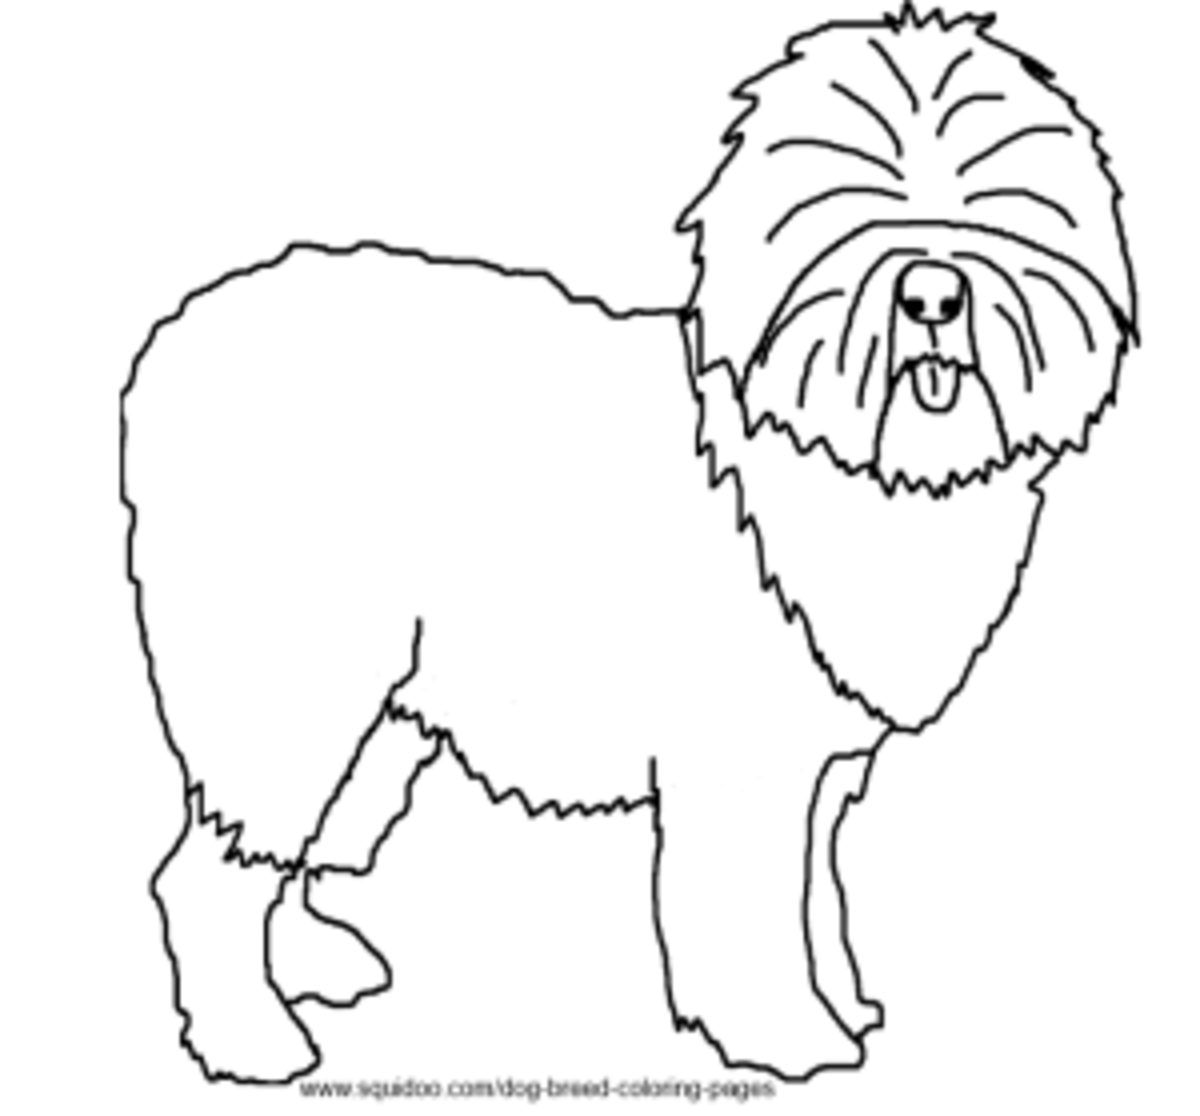 Dog Breed Coloring Pages   HubPages